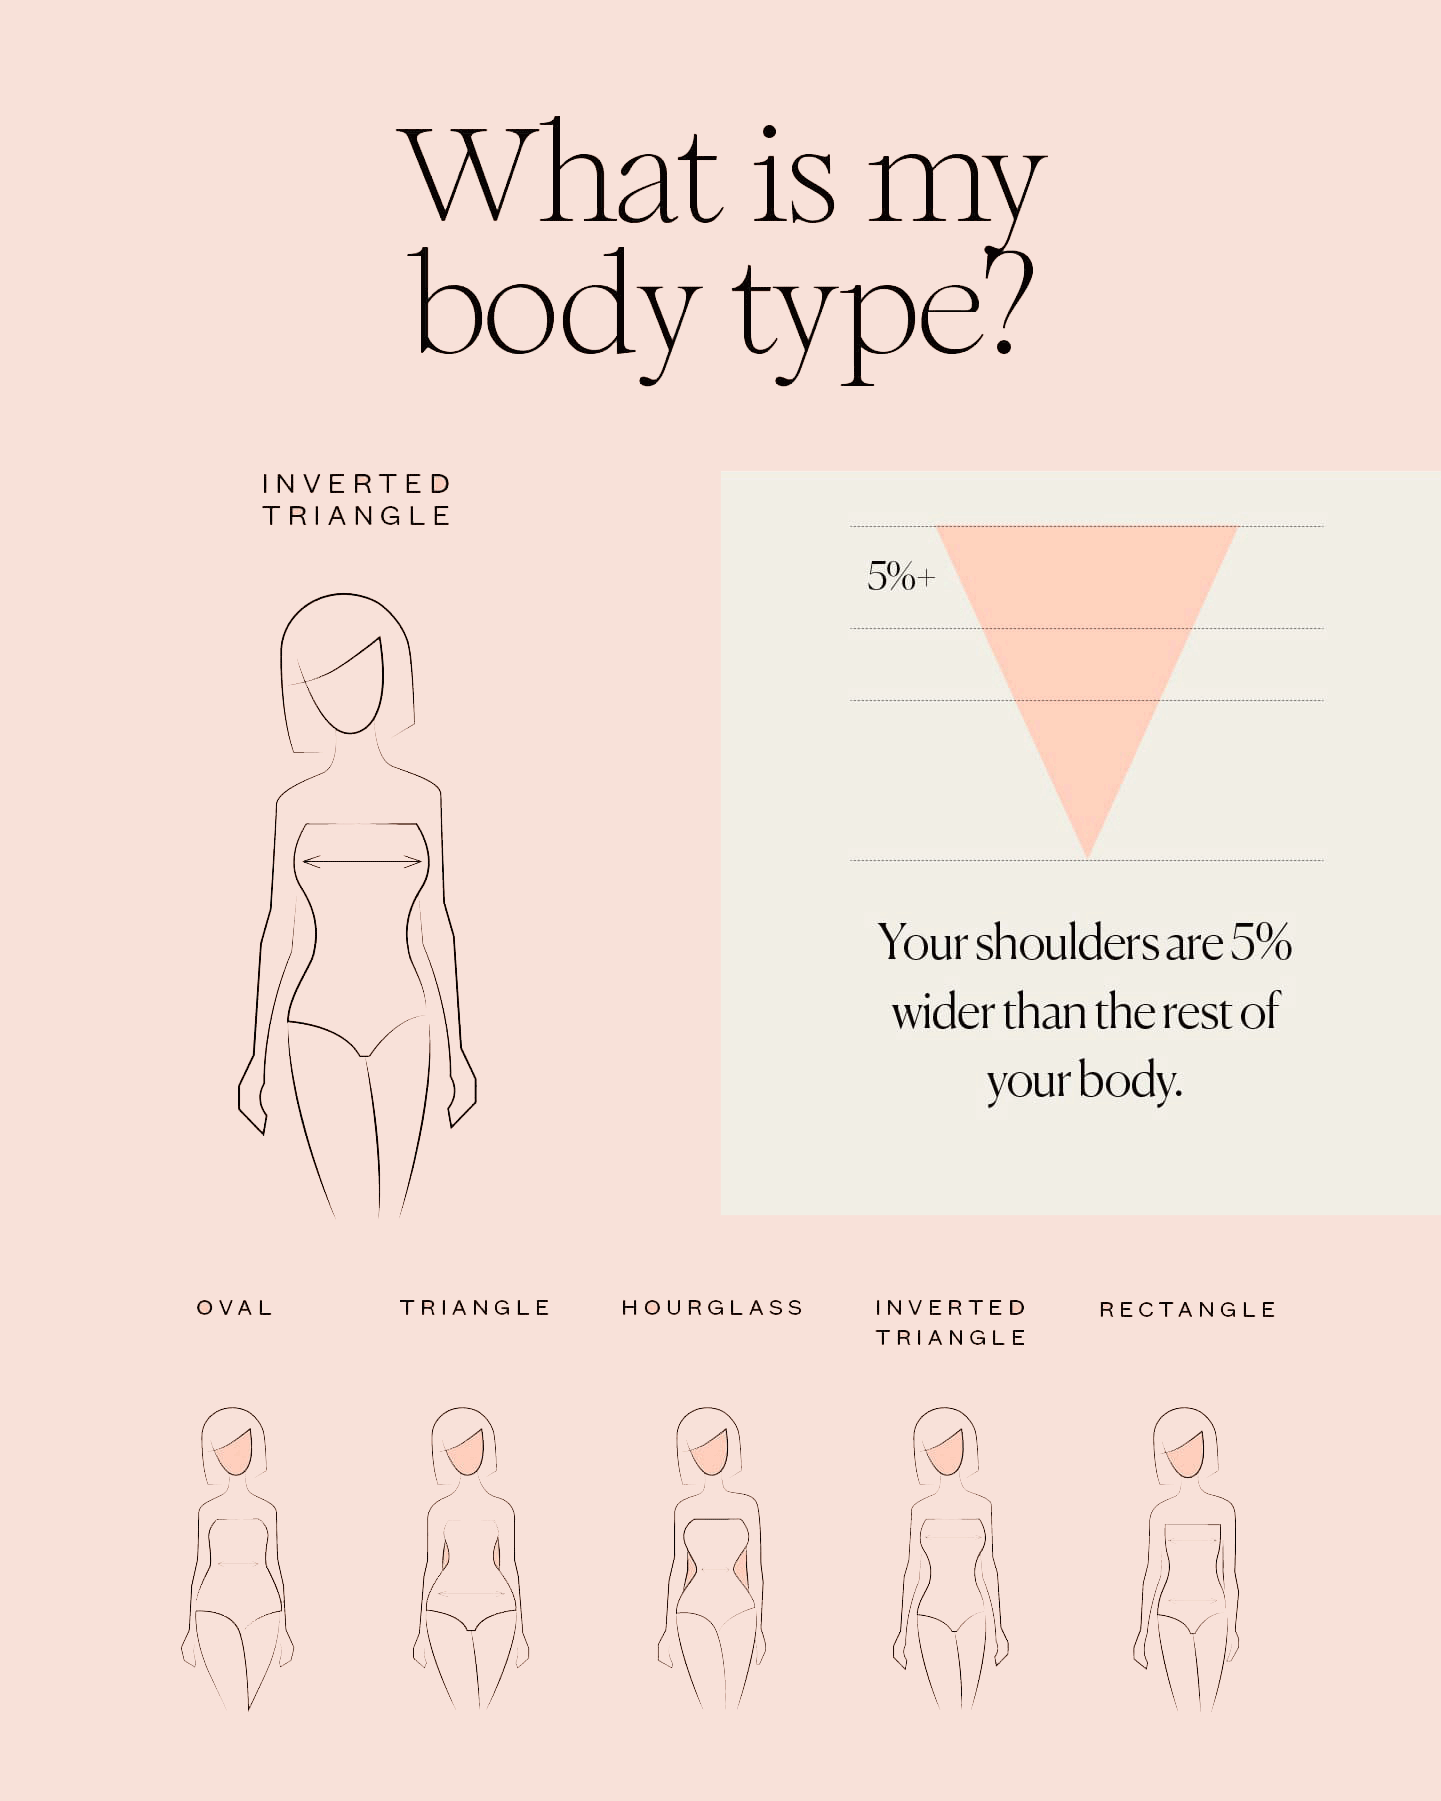 inverted triangle body shape